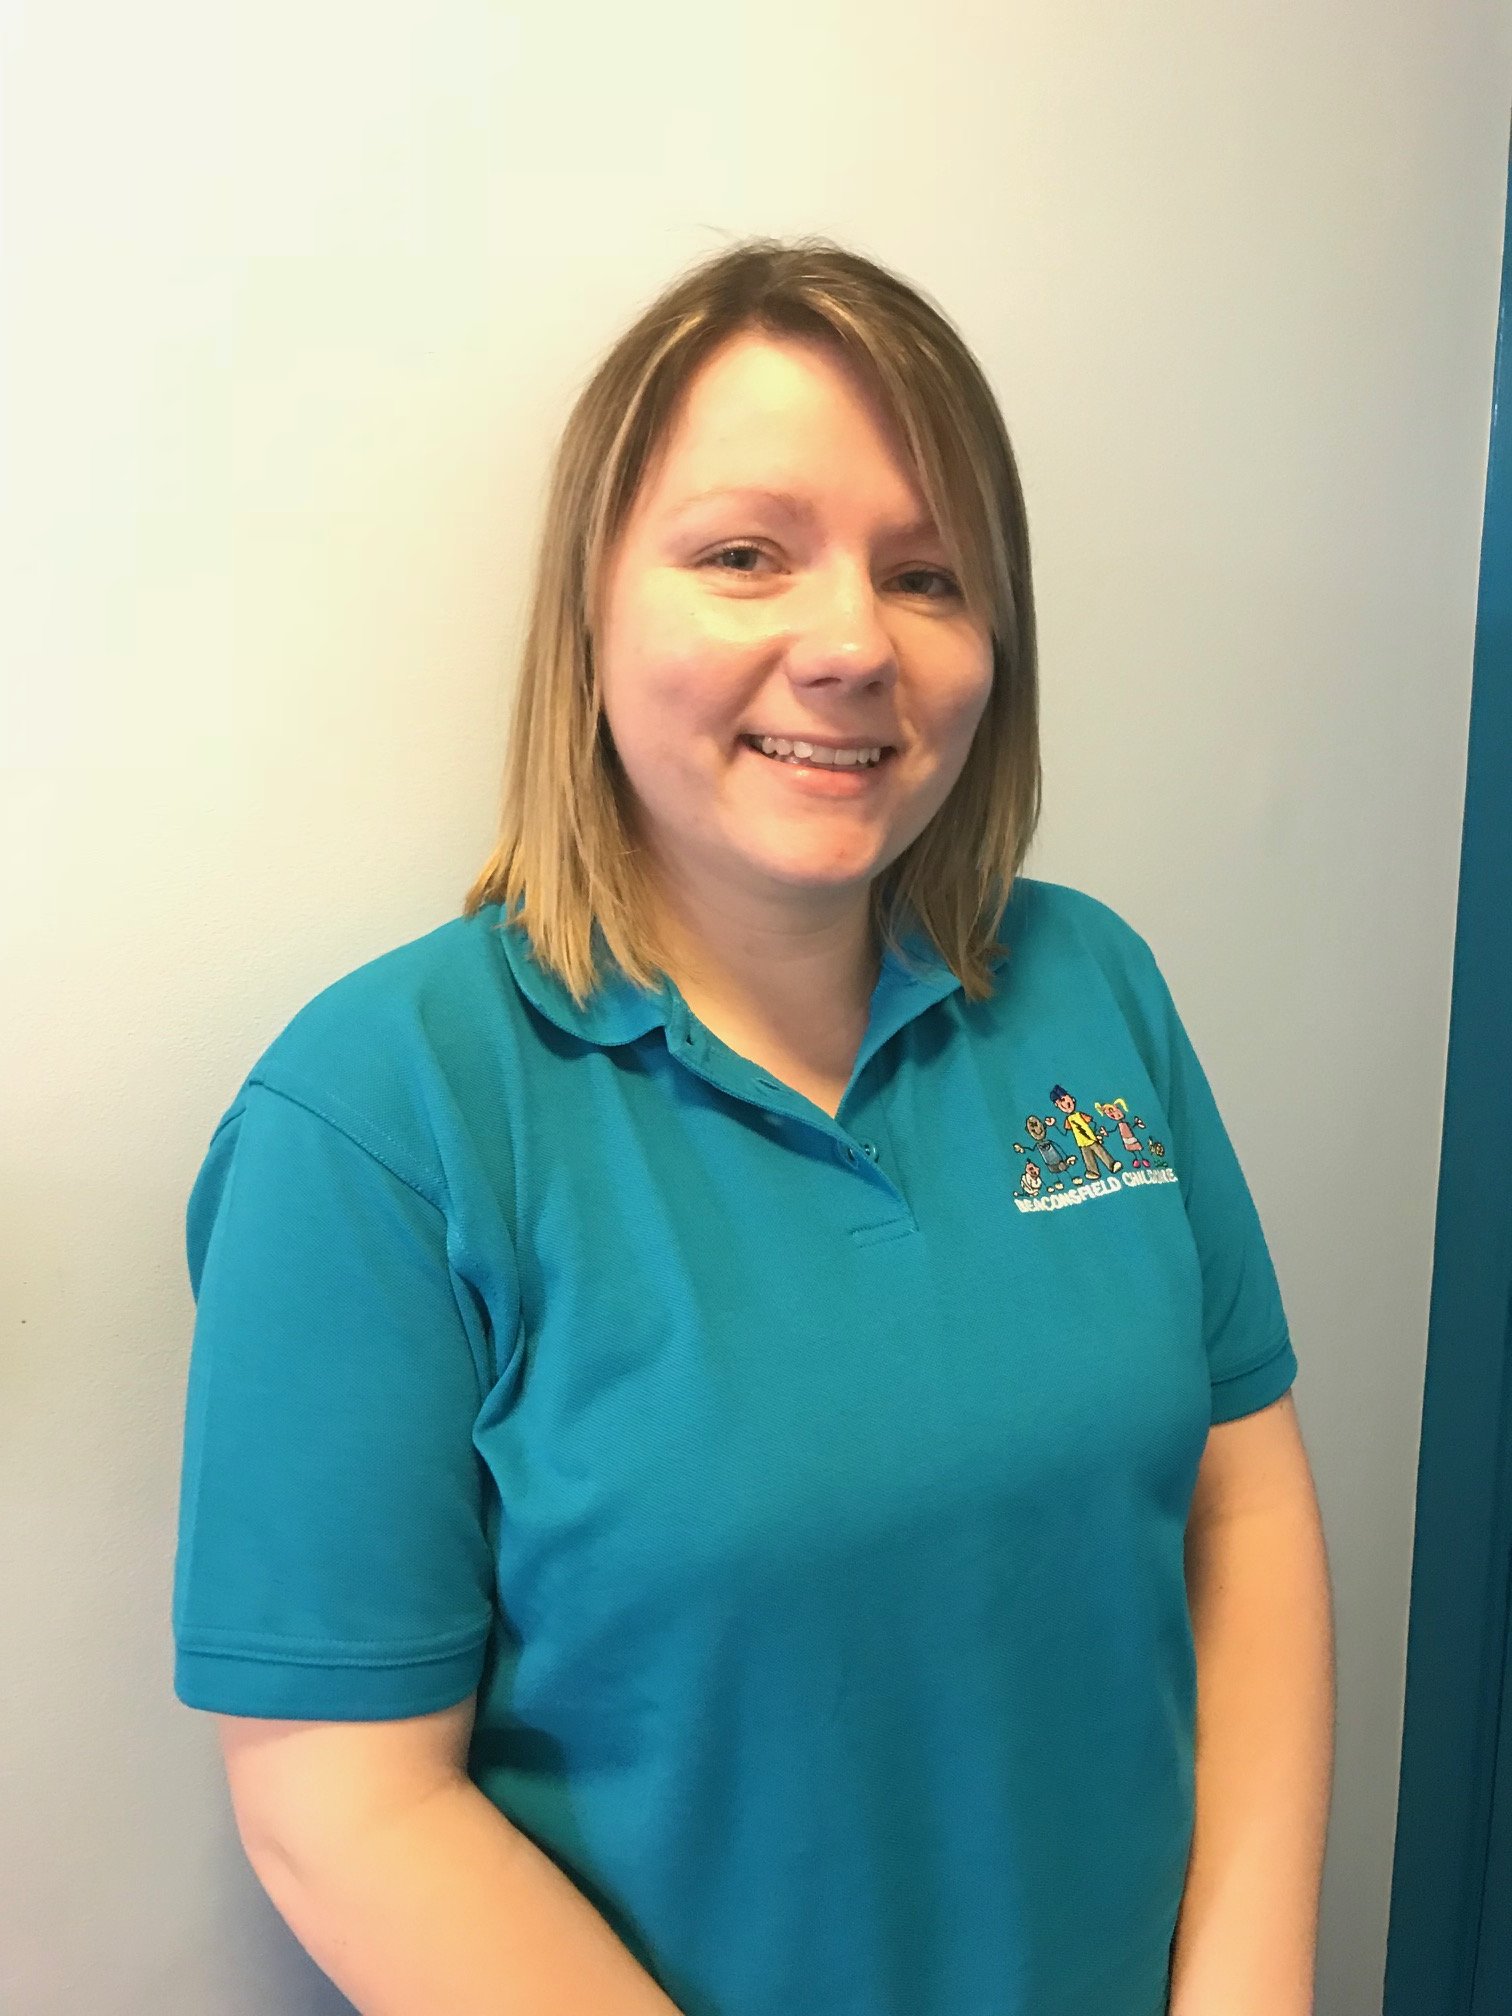 Meet the Team at Beaconsfield Childcare – Lisa